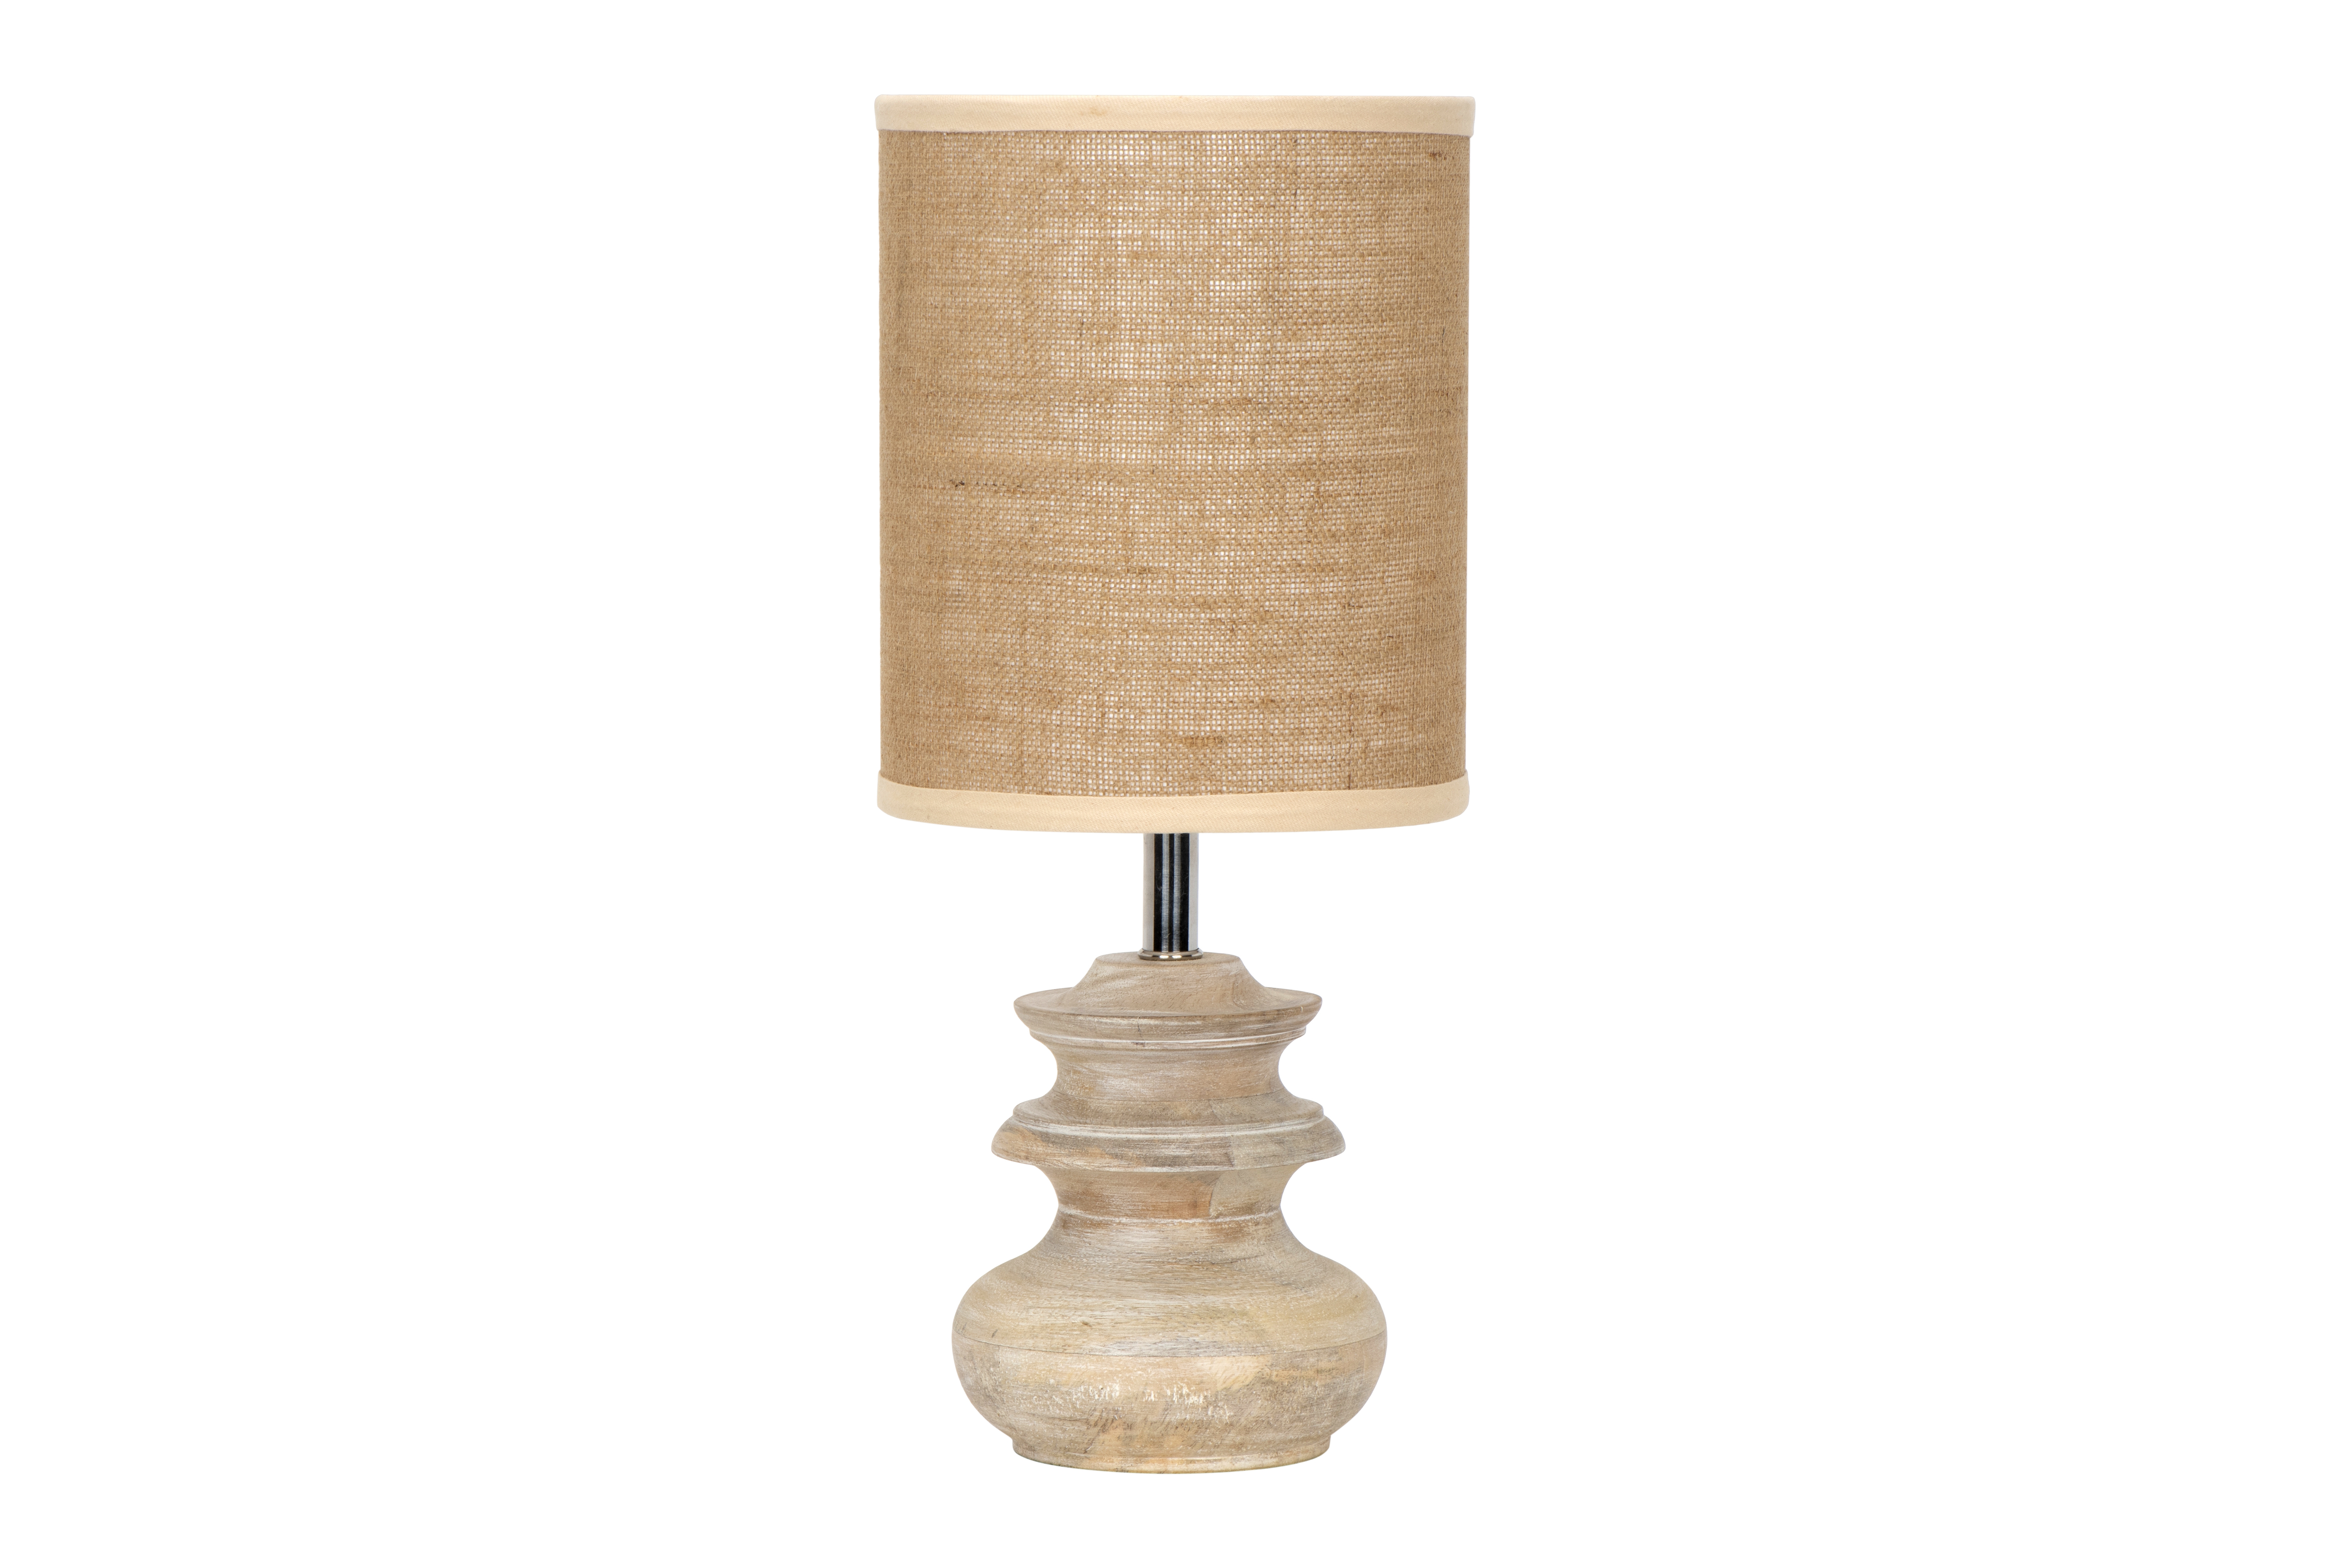 Small Bleached Mango Wood Table Lamp with Jute Shade - Nomad Home